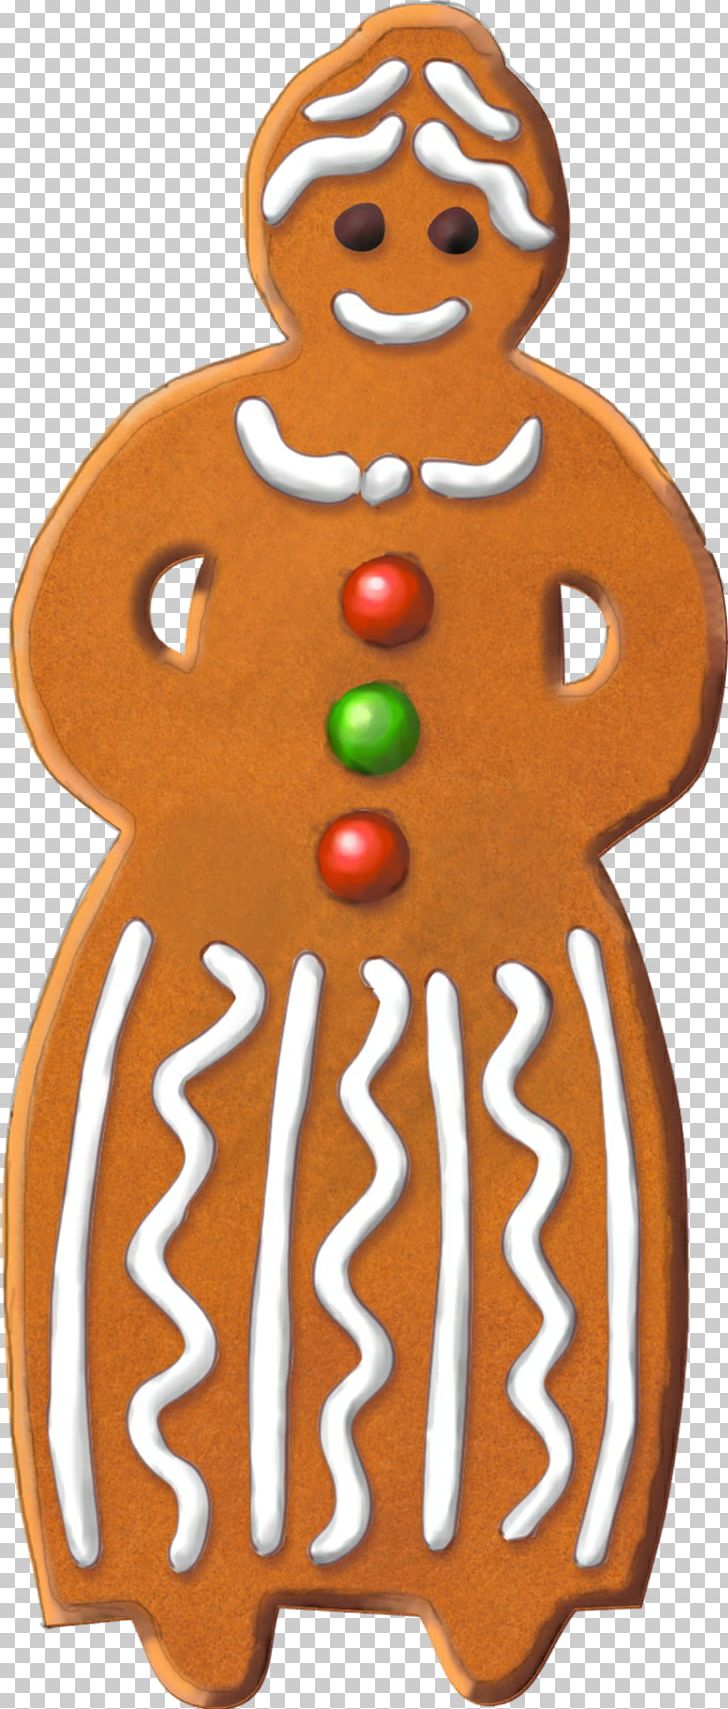 Gingerbread PNG, Clipart, Christmas, Christmas Decoration, Christmas Ornament, Christmas Tree, Digital Image Free PNG Download